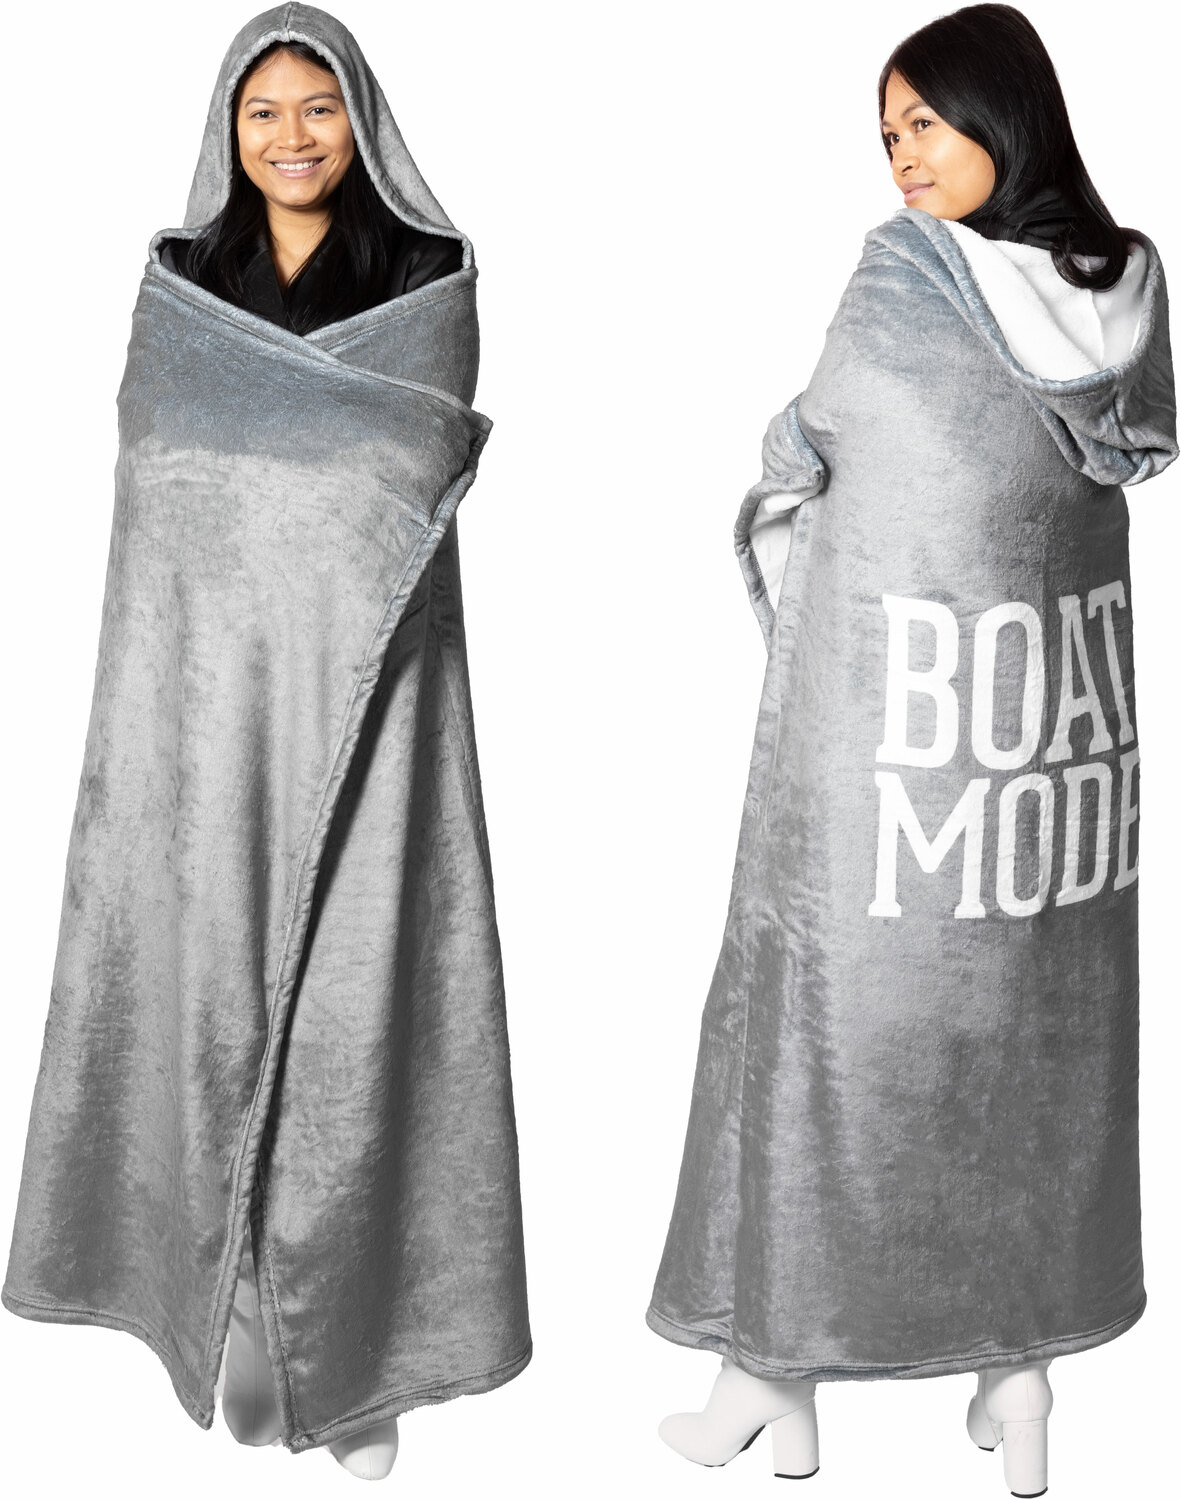 Boat Mode by We People - Boat Mode - 50" x 60" Royal Plush Hooded Blanket